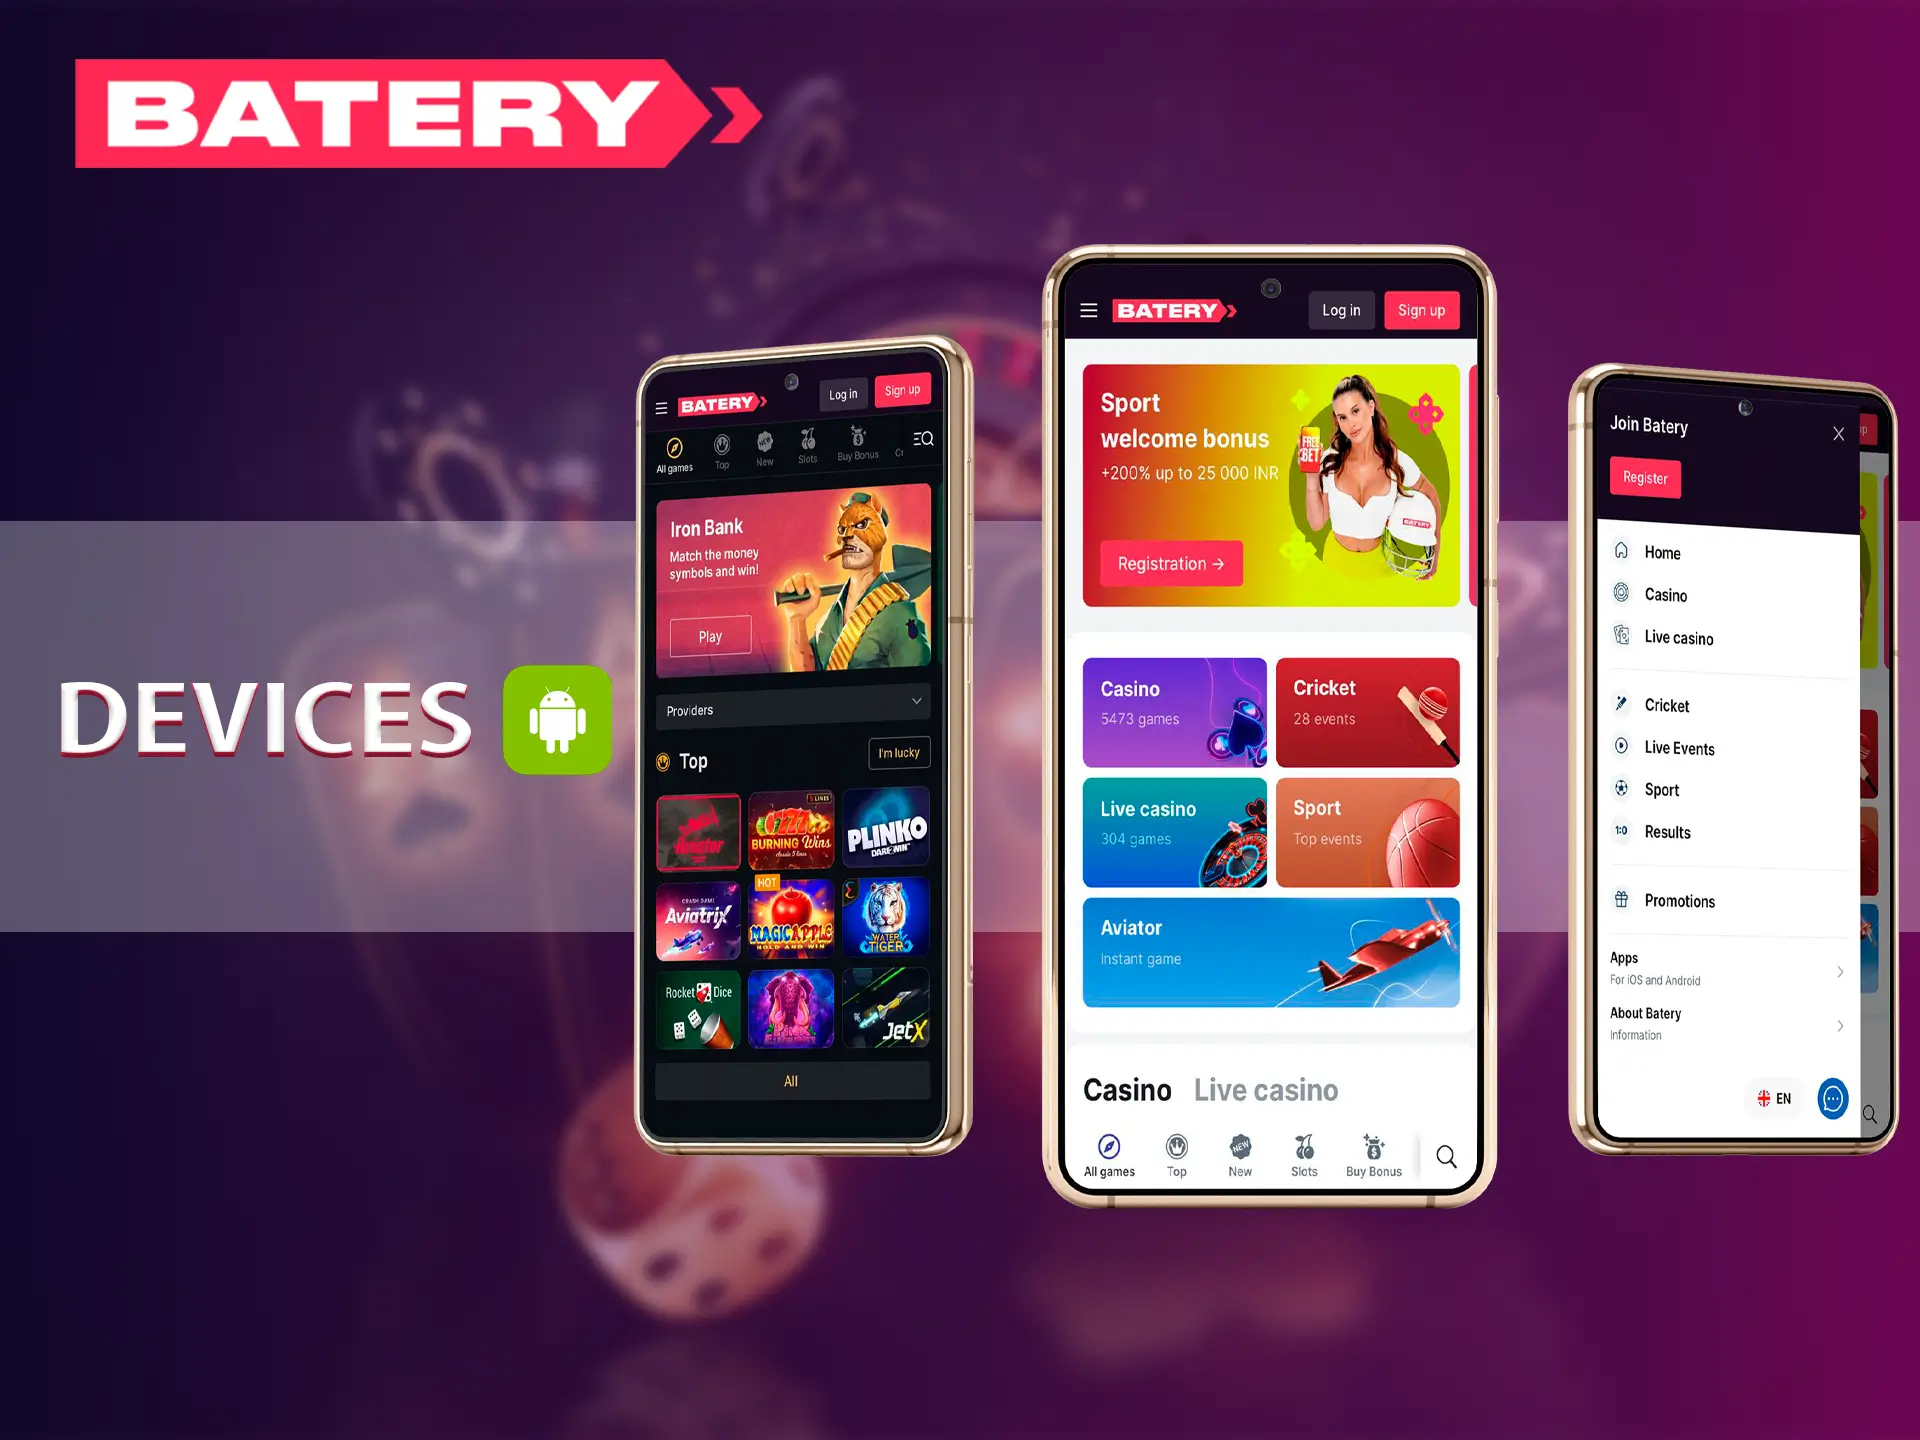 The Batery app gives out excellent performance on many popular android devices.